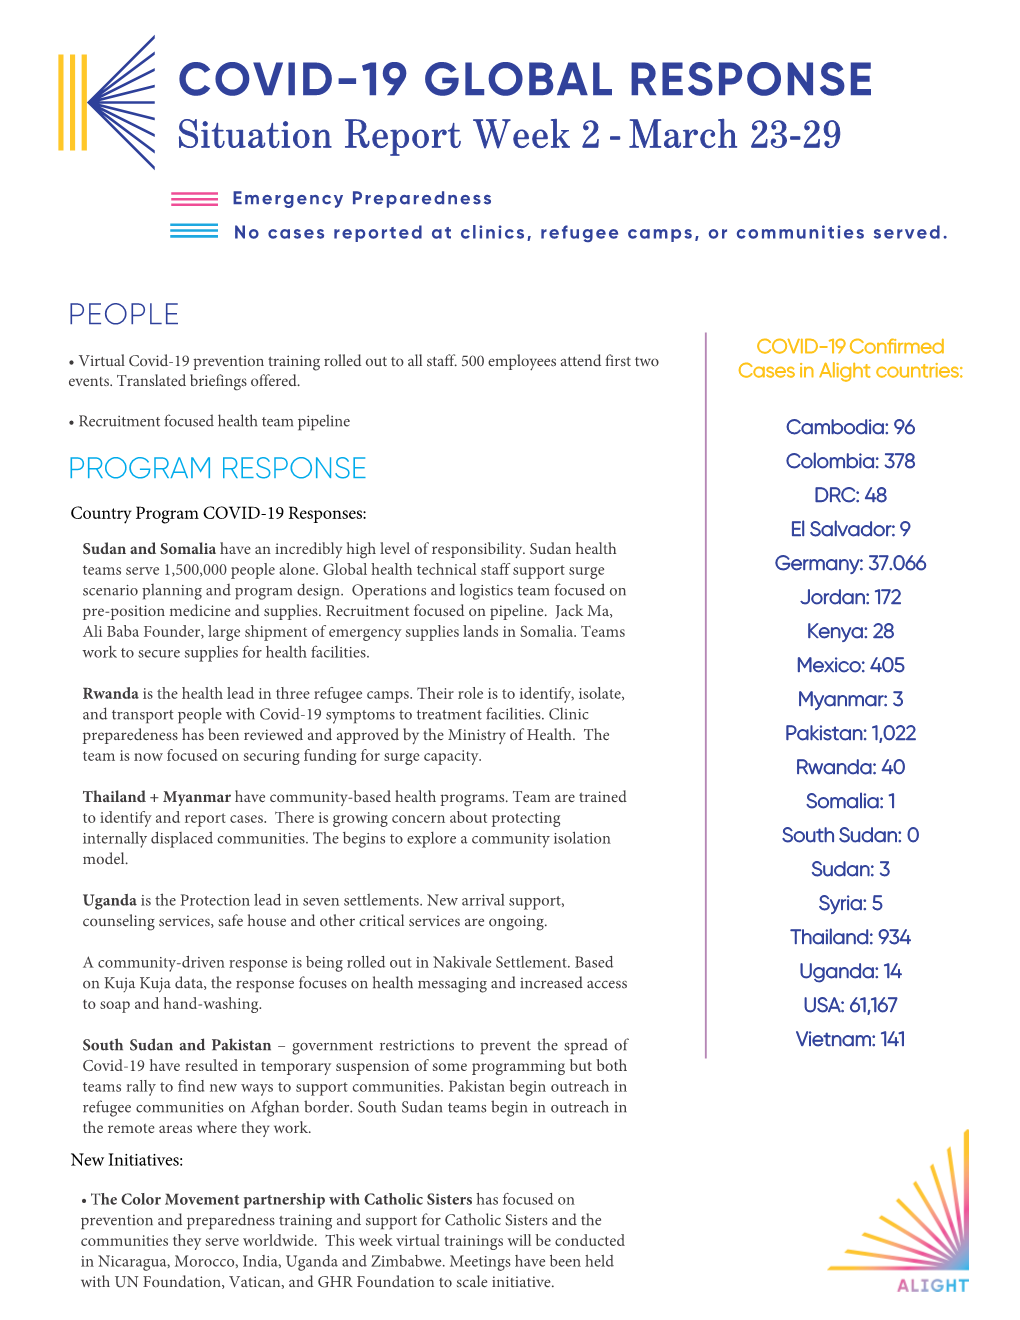 COVID-19 GLOBAL RESPONSE Situation Report Week 2 - March 23-29